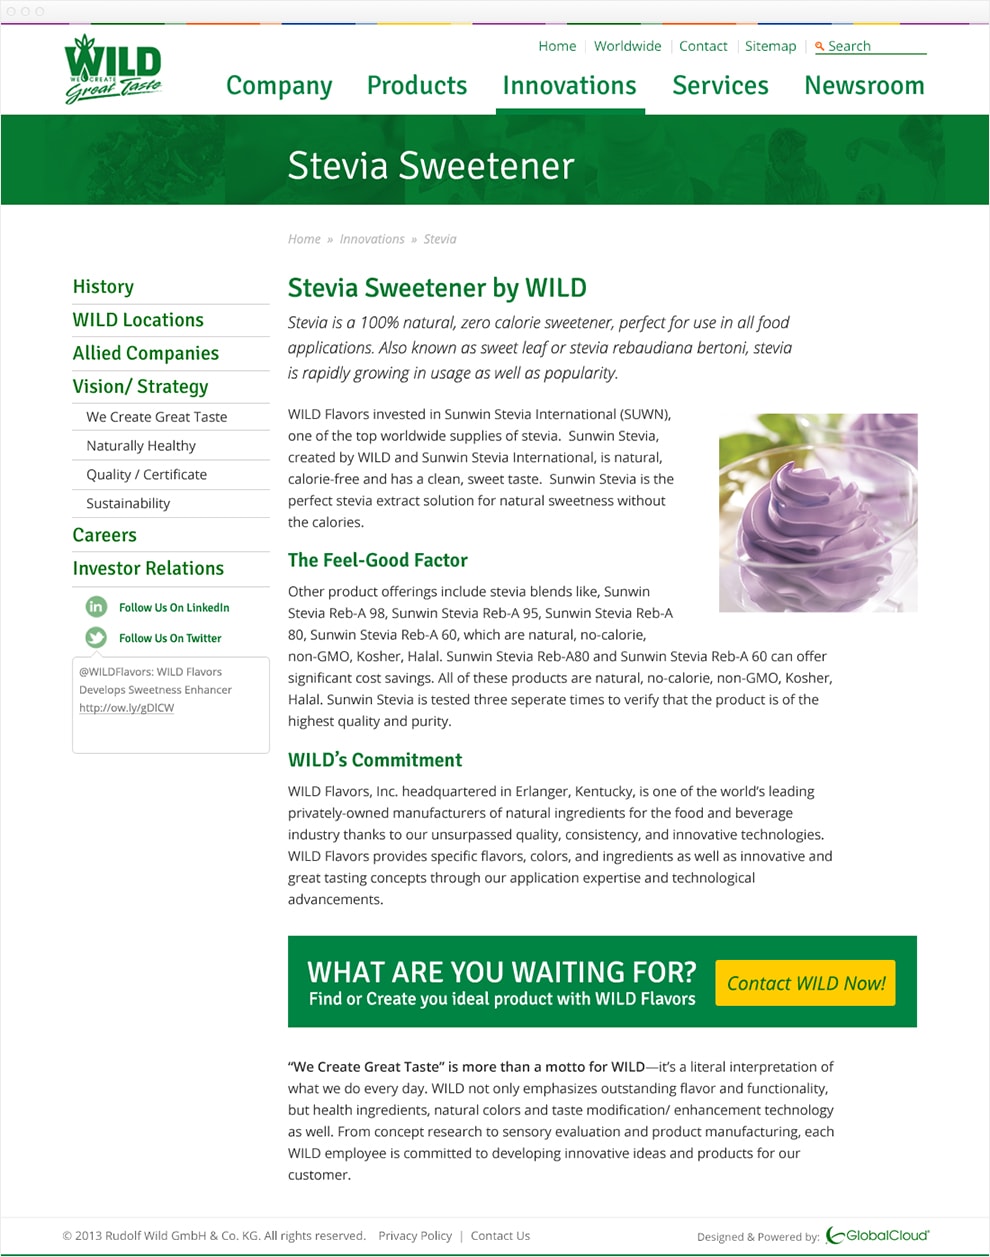 Screen capture of website with the same header and main nav as the previous image. A new full-width green banner with white text that says Stevia Sweetener is just below the header. The interior page is split into two columns. The left column is about 30% of the screen and contains sub-navigation of the Innovations page. The top level links are set in large green text while the second-level links are set in small gray text. Below the sub-nav are links to social media that show the latest tweet. The right column takes up the other 70% of the page and contains text and images about Stevia Sweetener. A large call to action banner is at the bottom of the page. The banner has a green background with white text and a large yellow button that says Contact WILD Now.